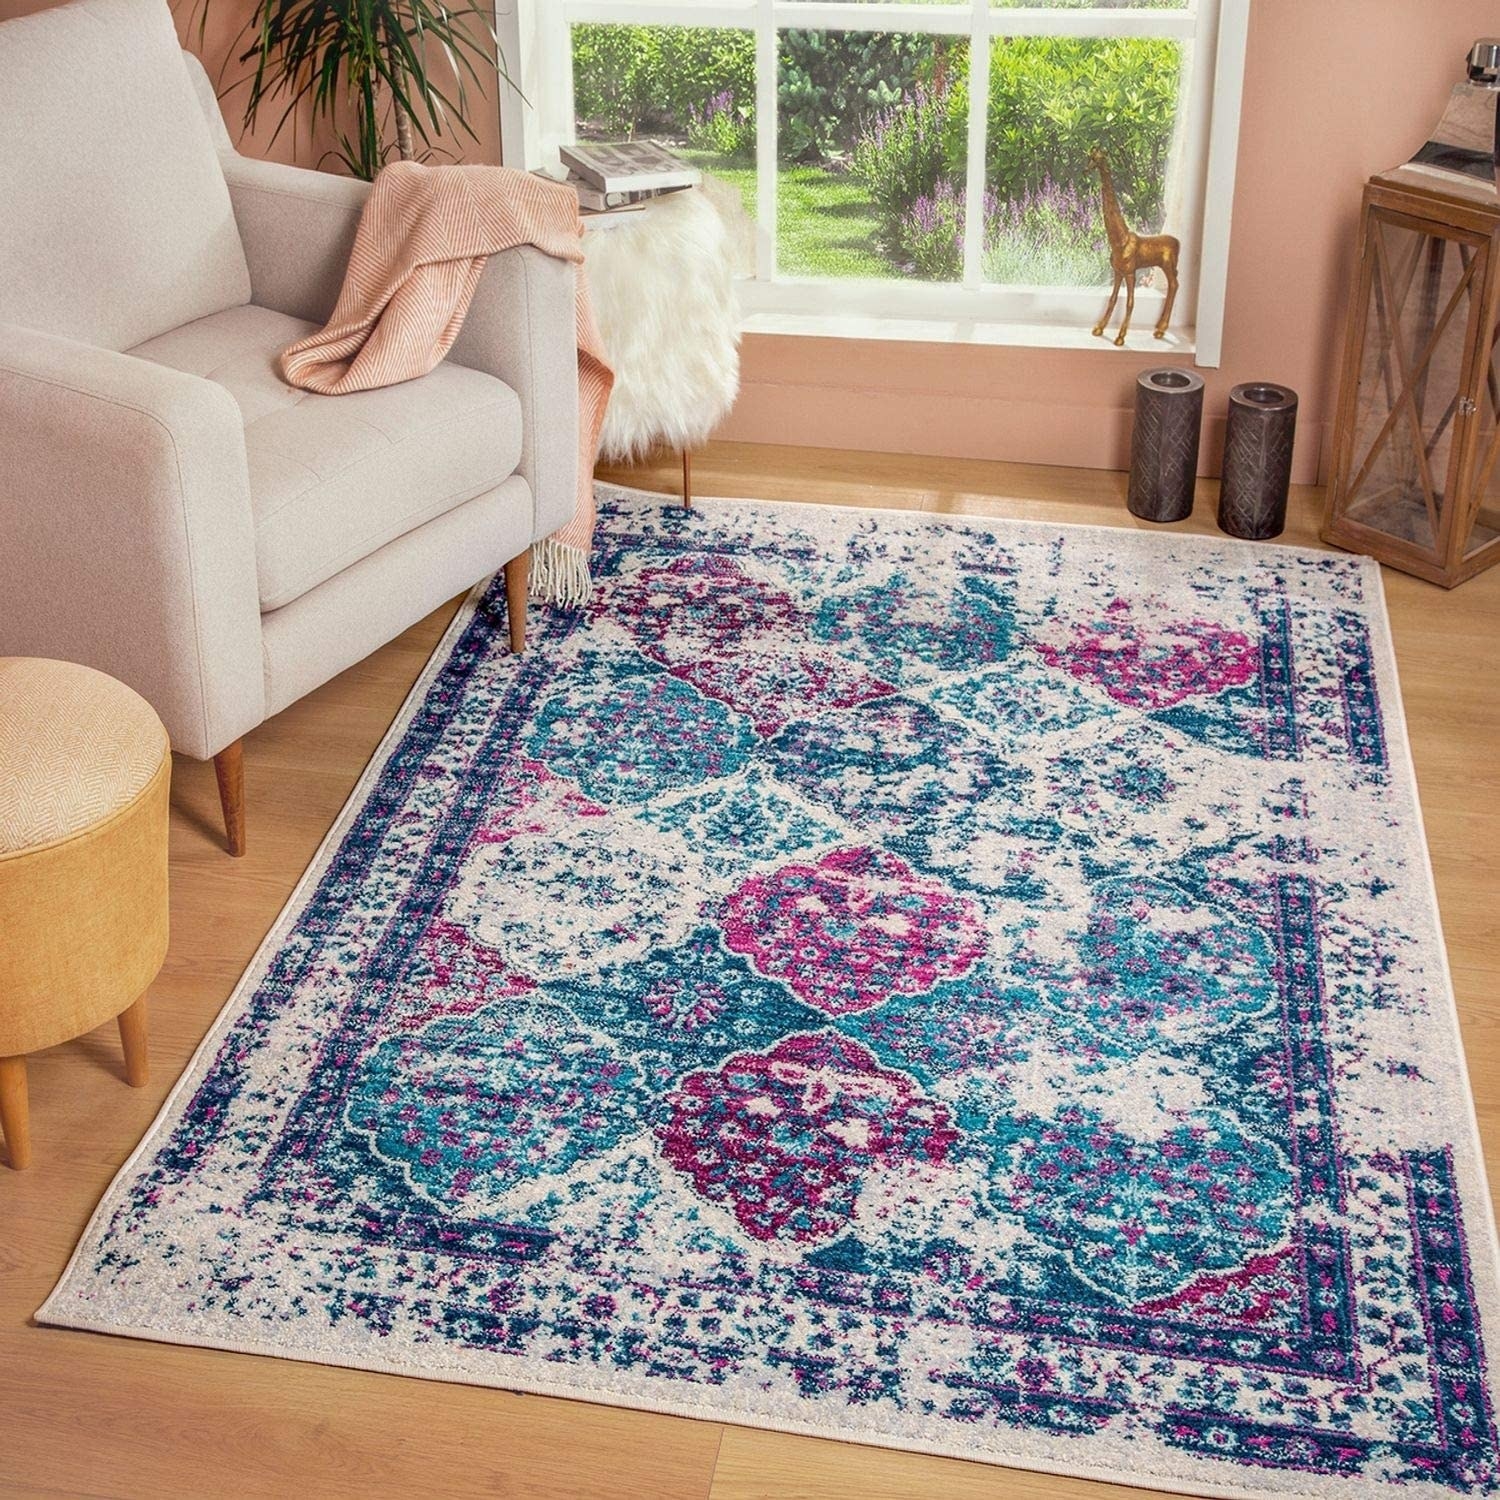 the vintage-style rug on the floor of a living room